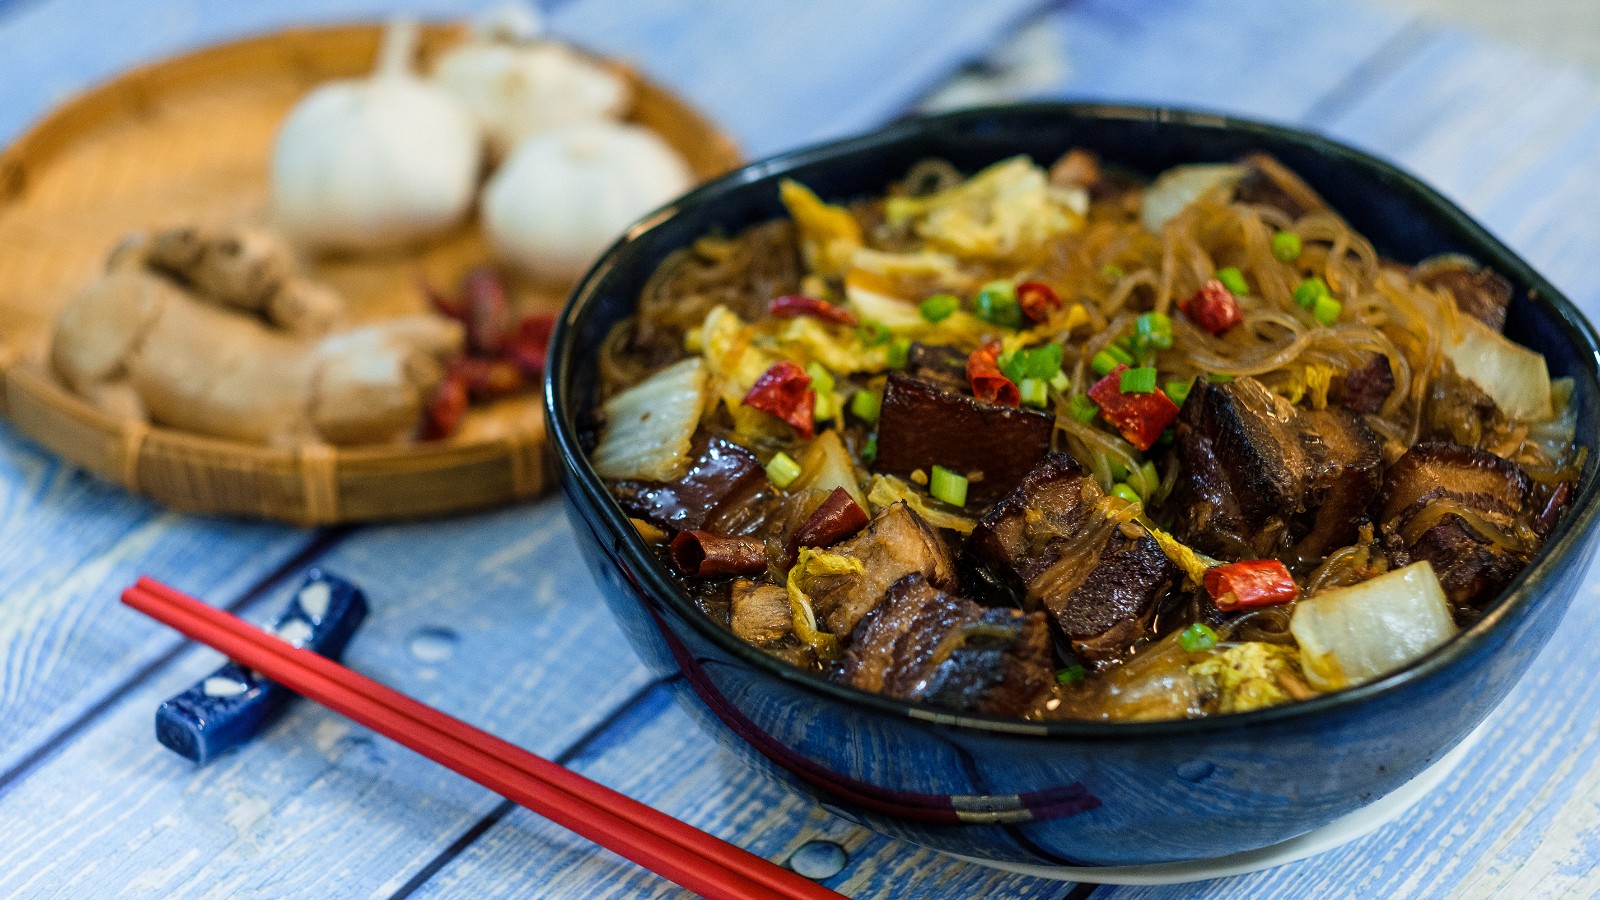 Image of Braised Pork Belly with Vermicelli Noodles & Napa Cabbage (猪肉白菜炖粉条)